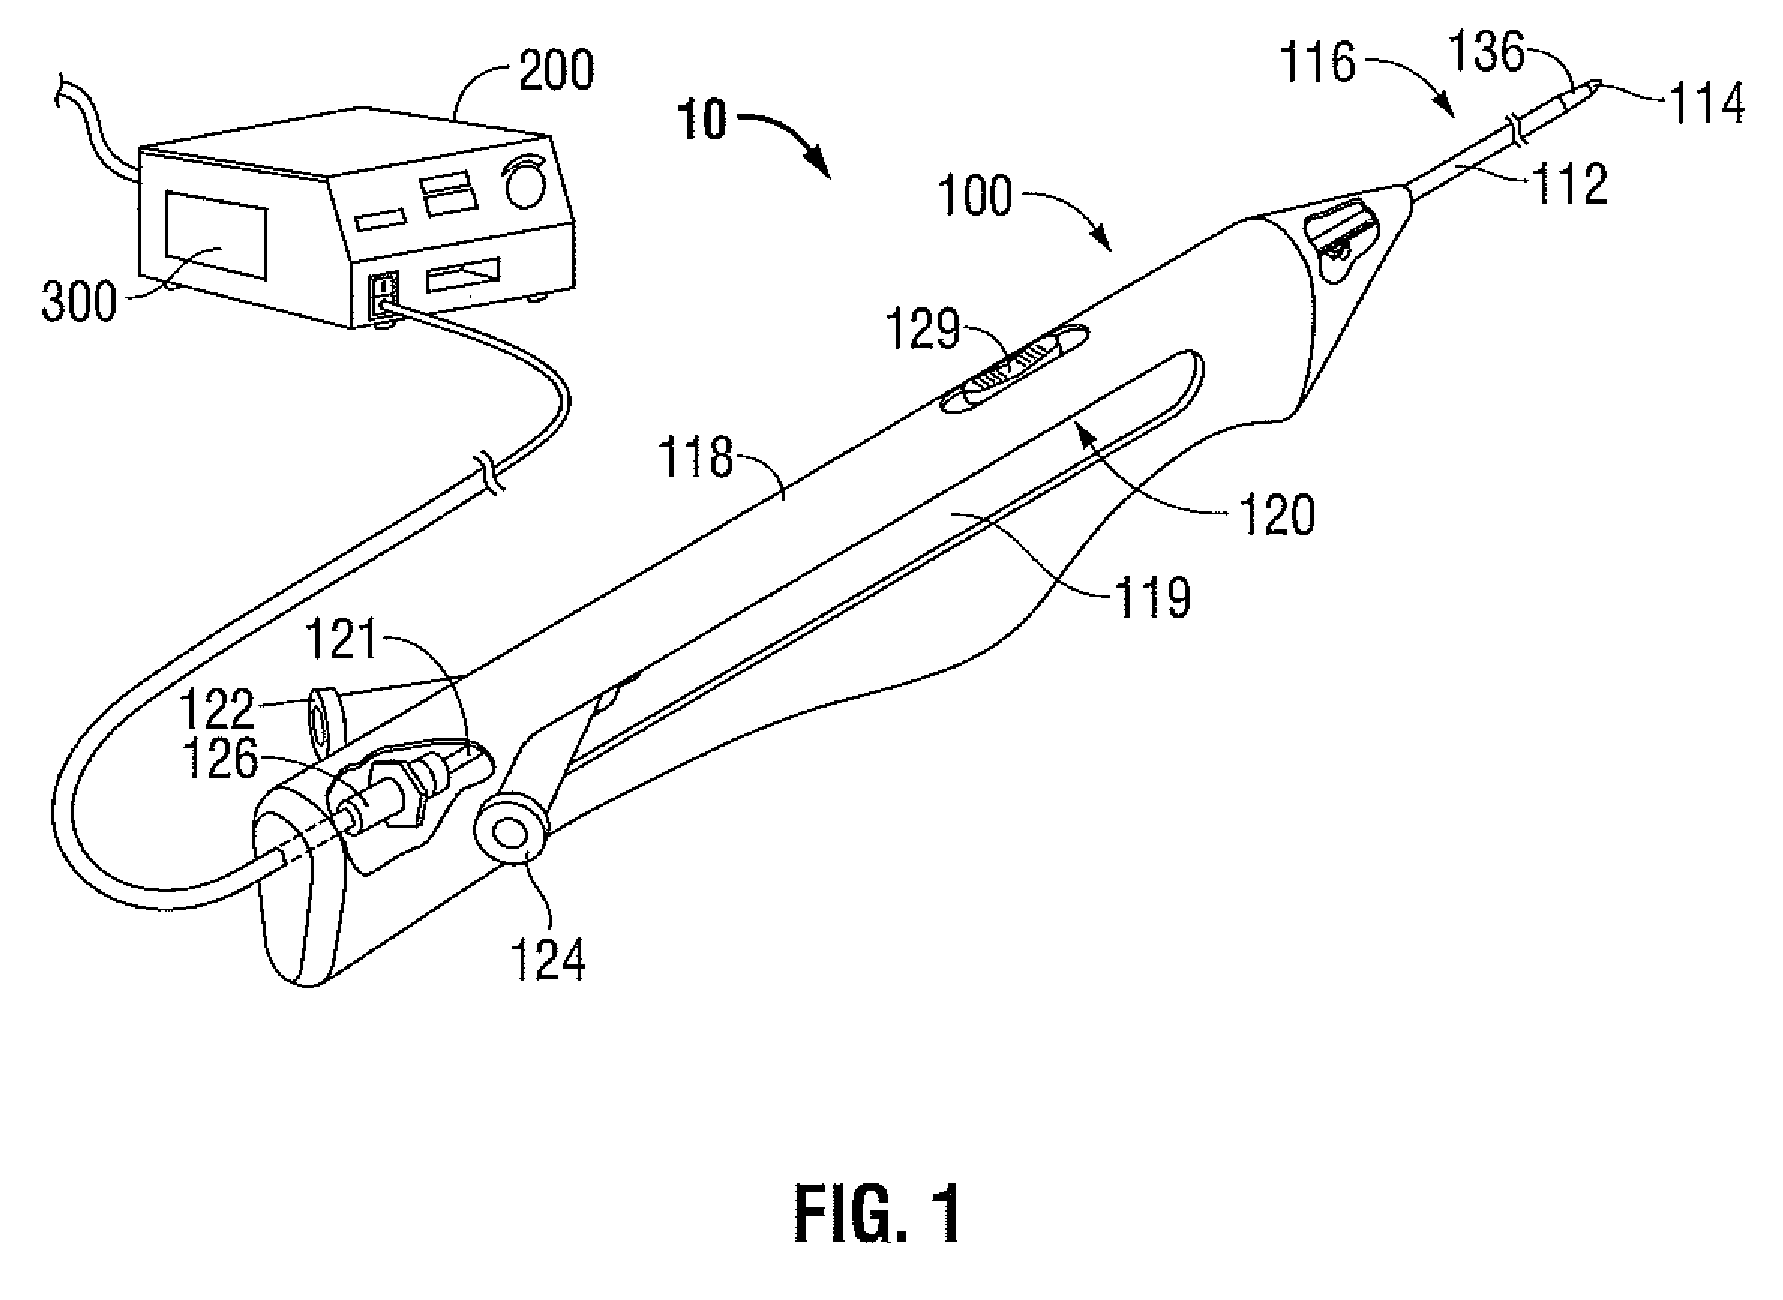 Method and System for Delivering a Medicant